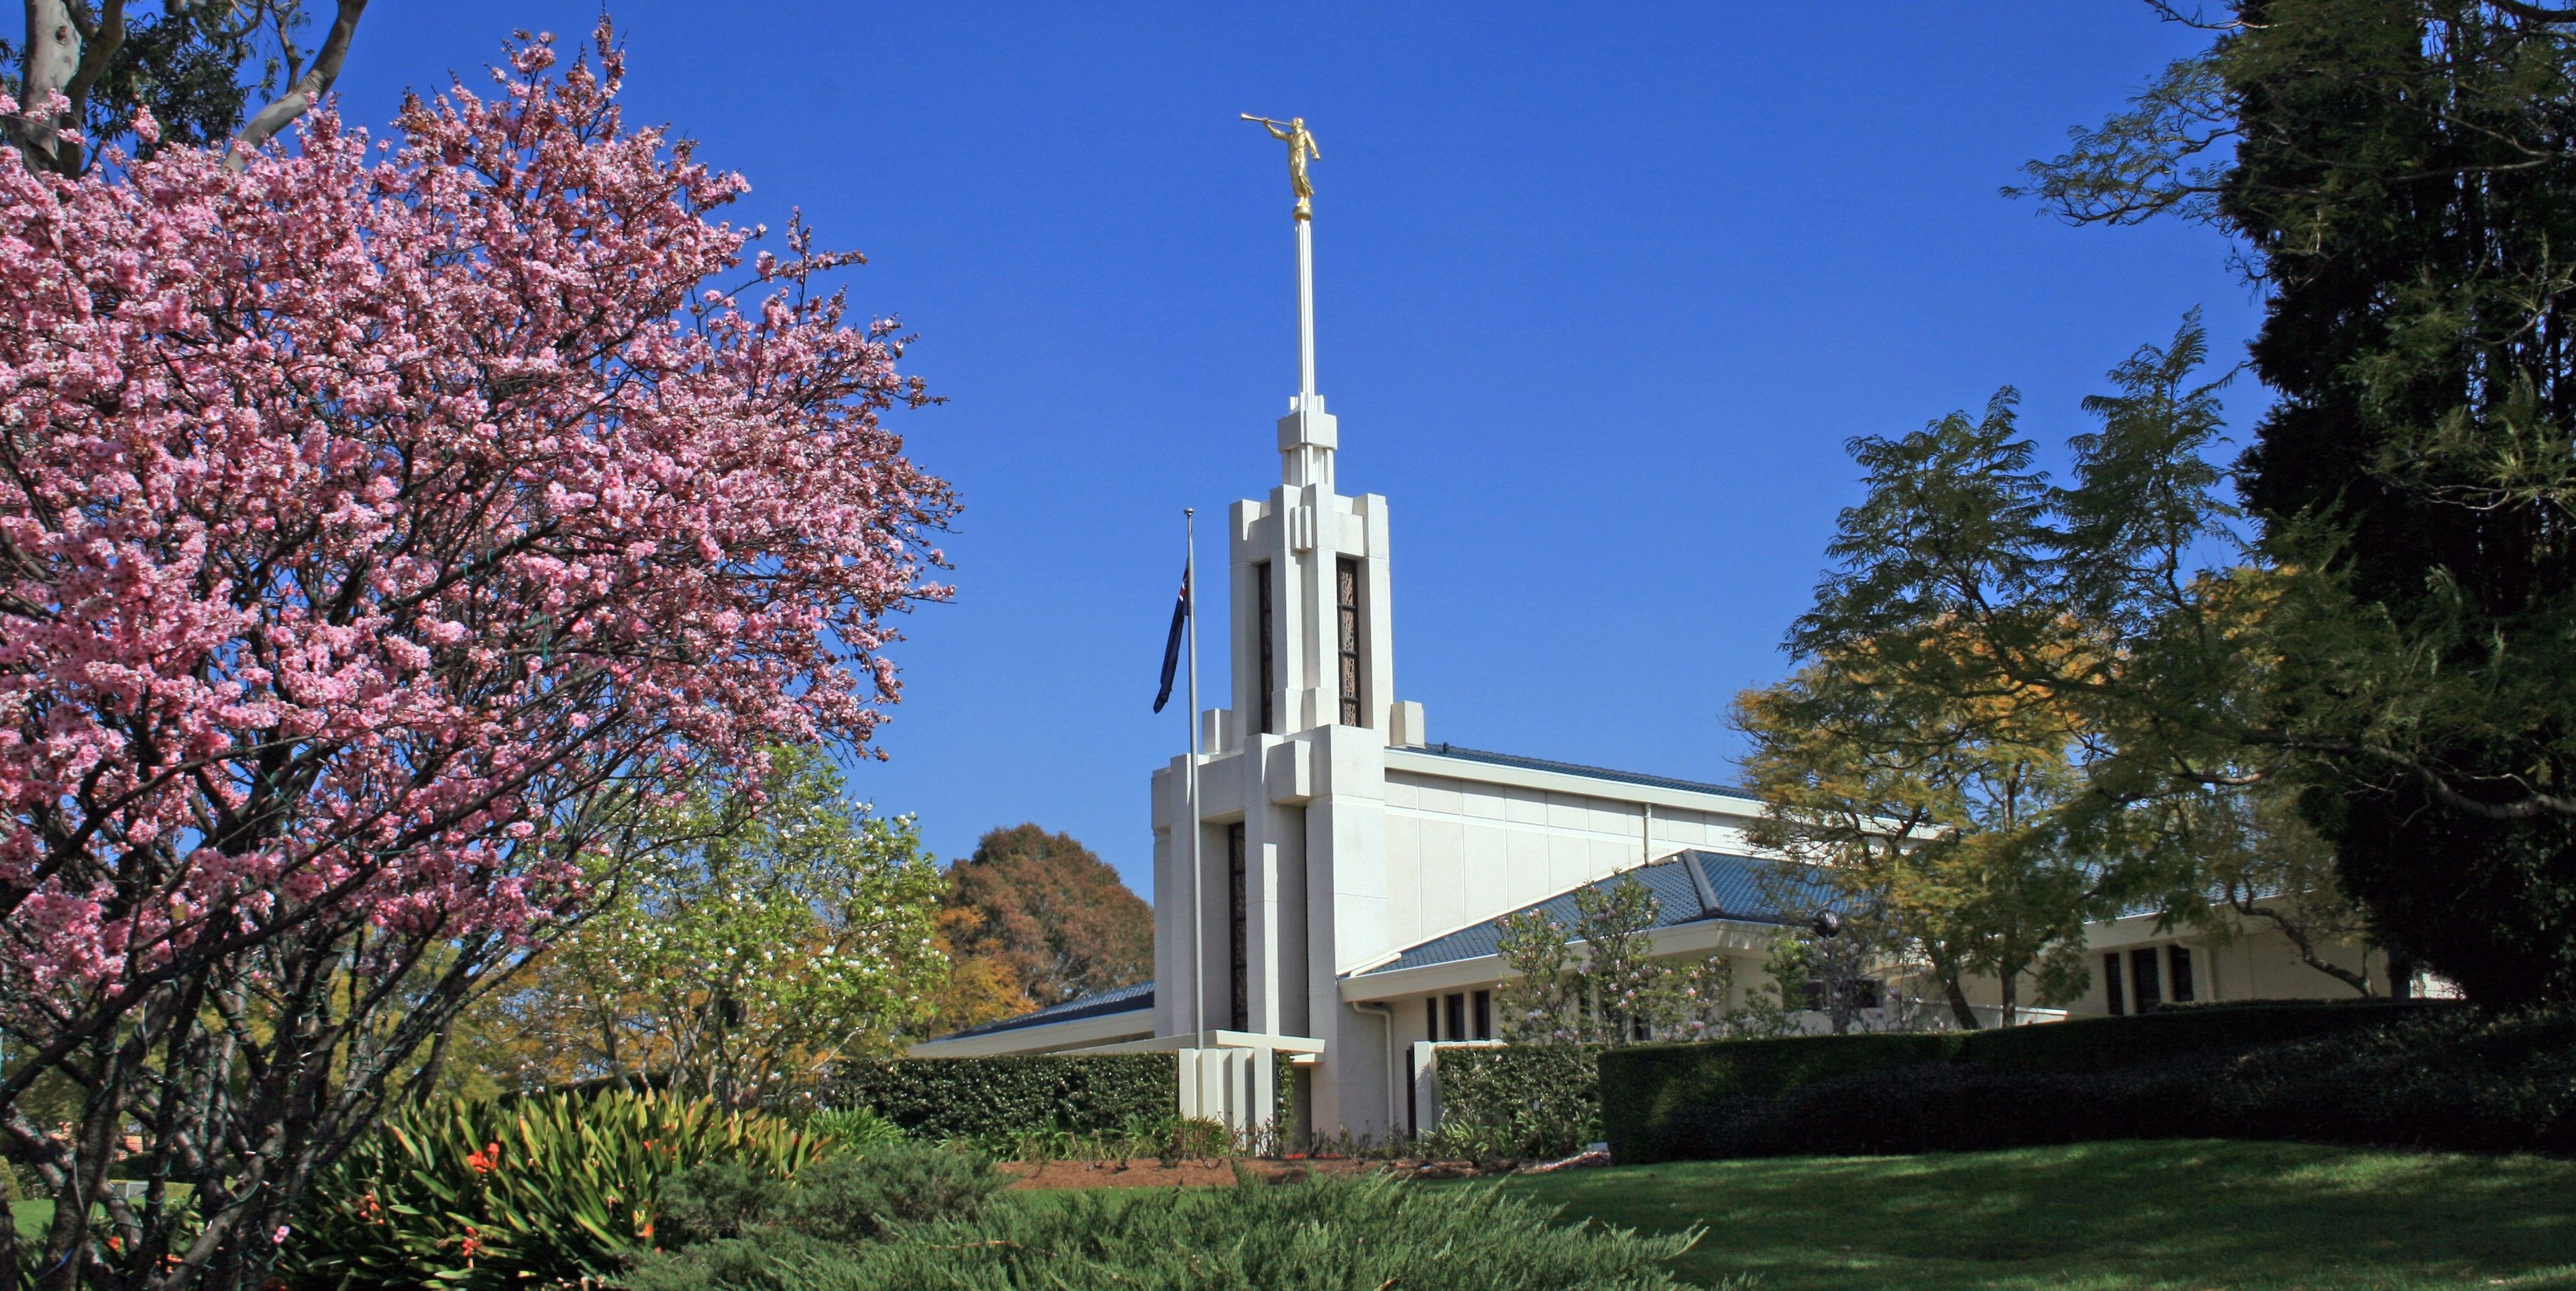 The Sydney Australia Temple, including the scenery and entrance.